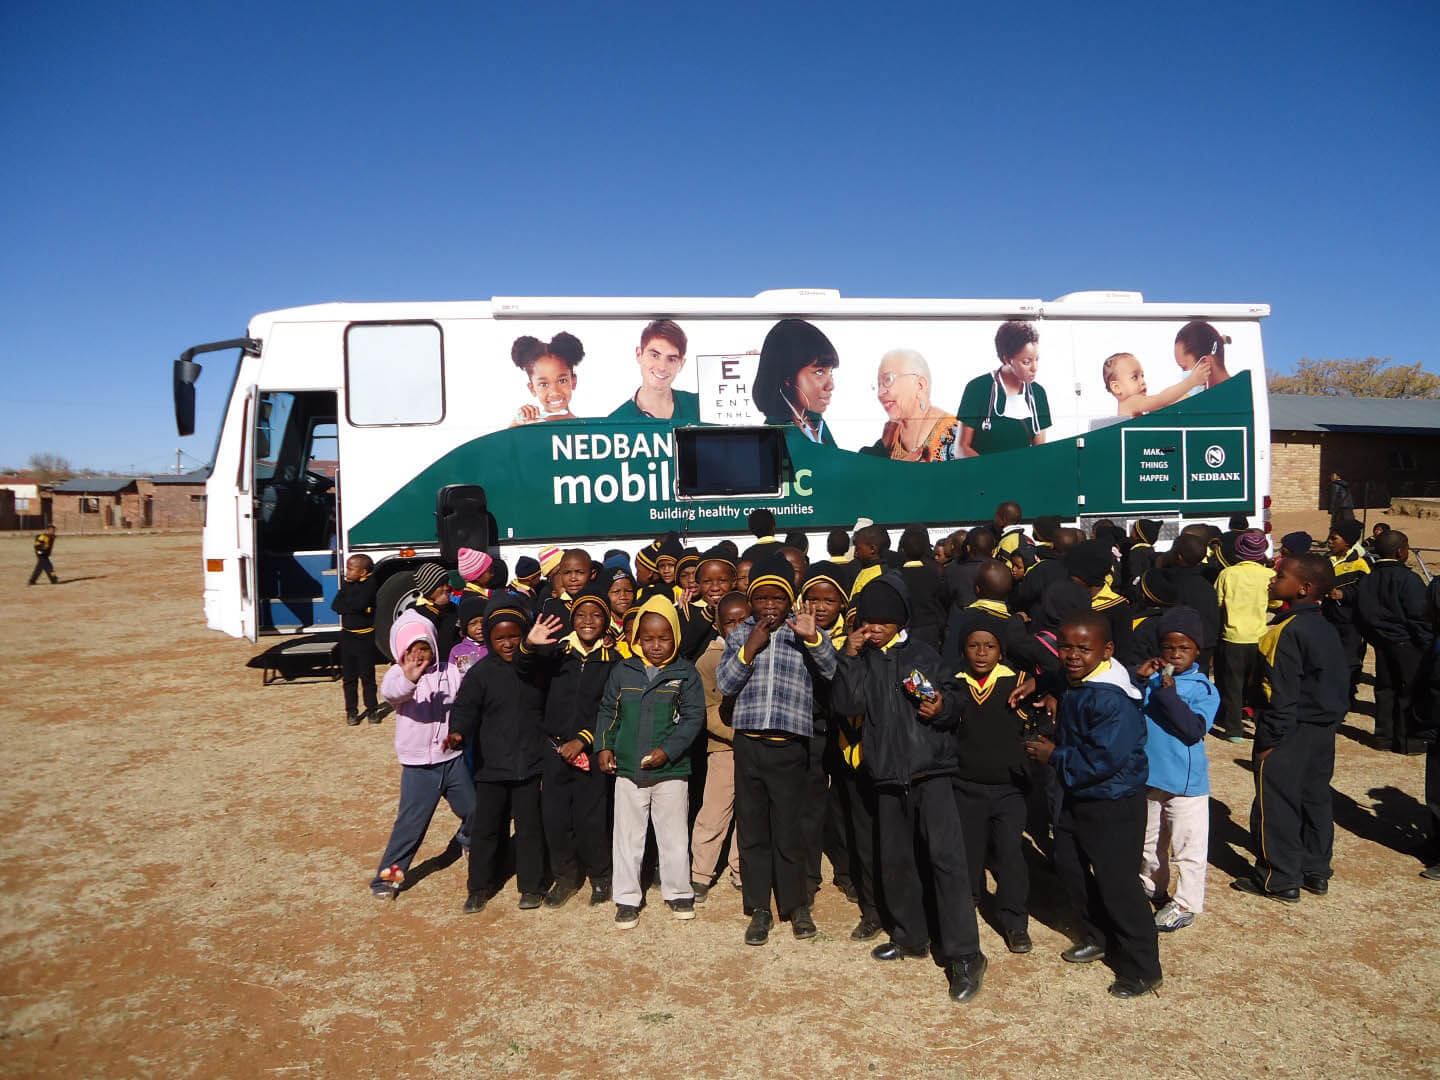 Nedbank mobile clinic visiting a school